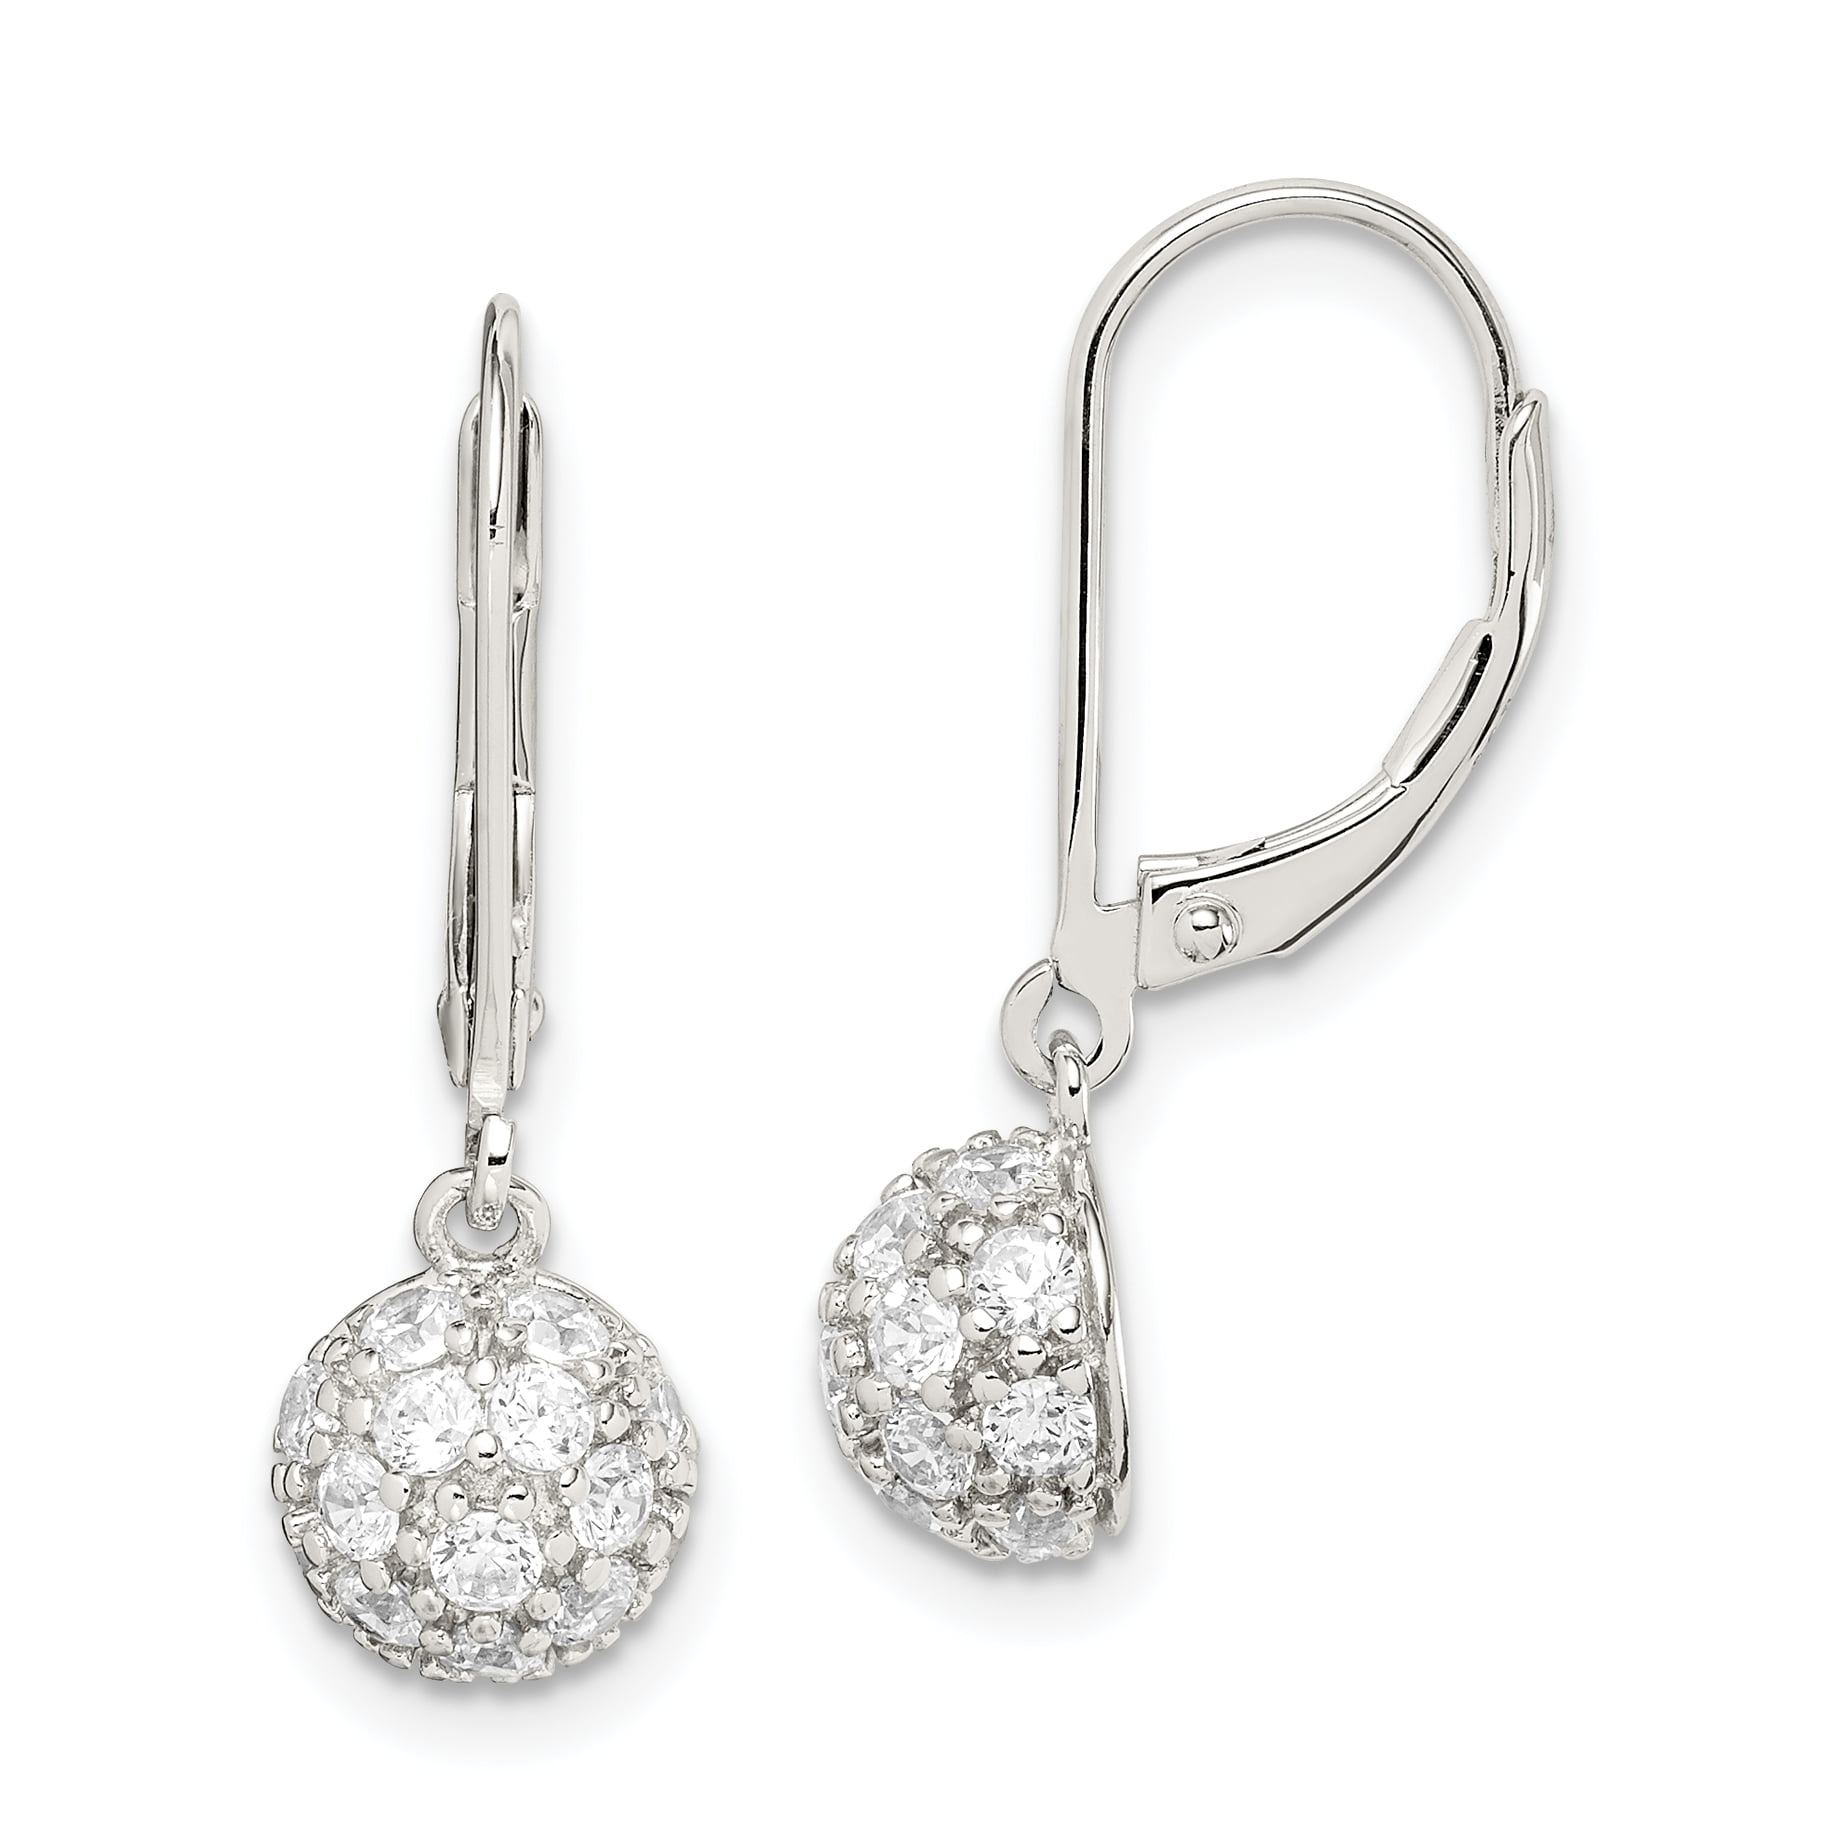 Details about   Cheryl M Sterling Silver CZ Lab created Opal Lever back Earrings MSRP $228 